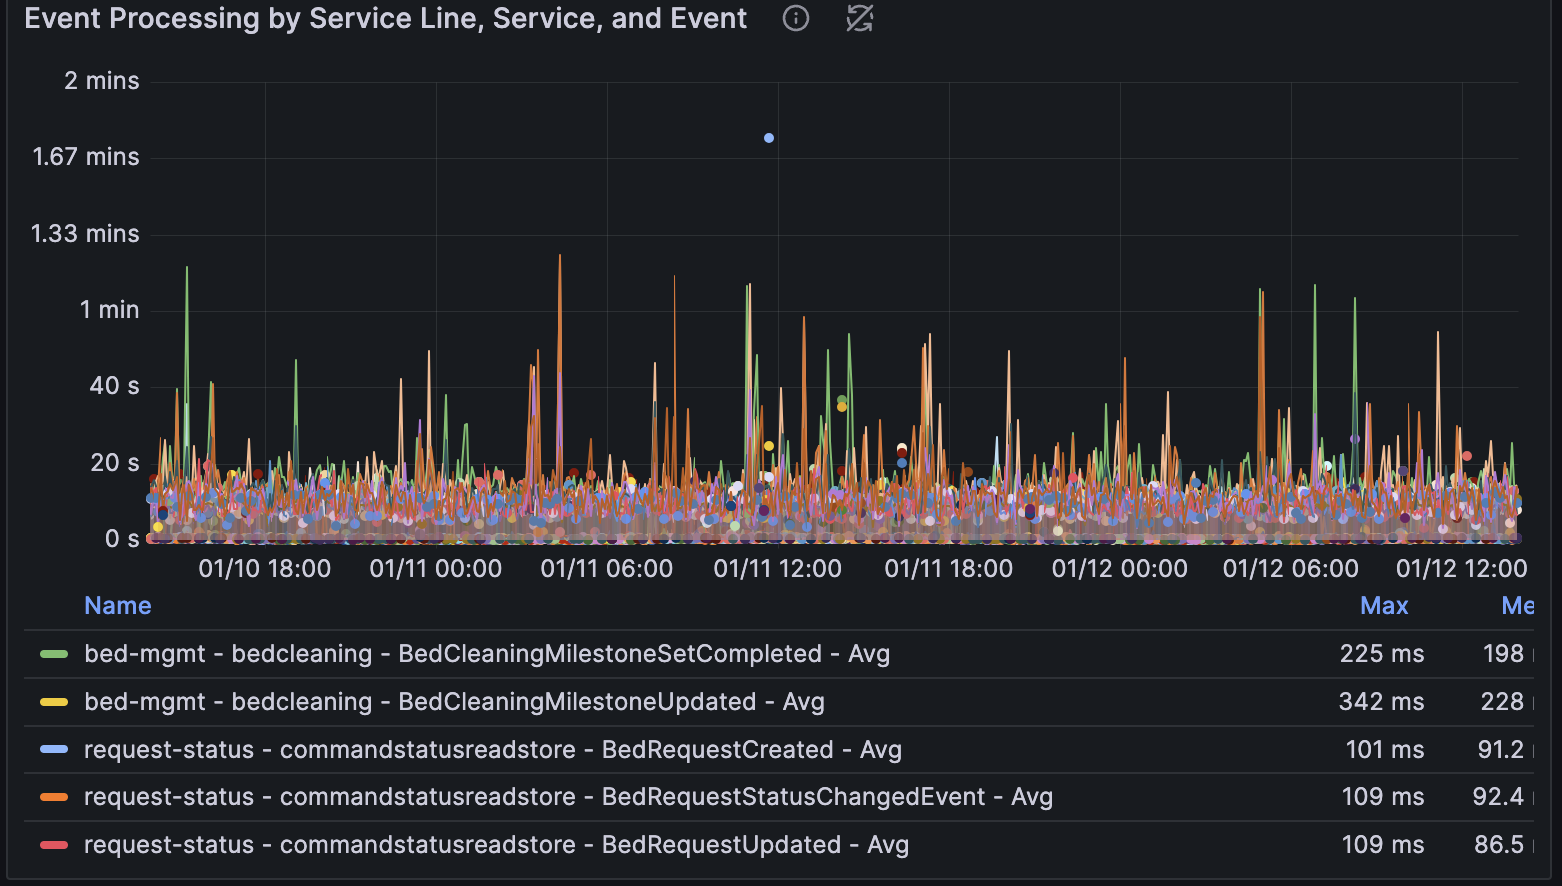 A Grafana dashboard displays the amount of time it took to process an event type for a given service in a service line.